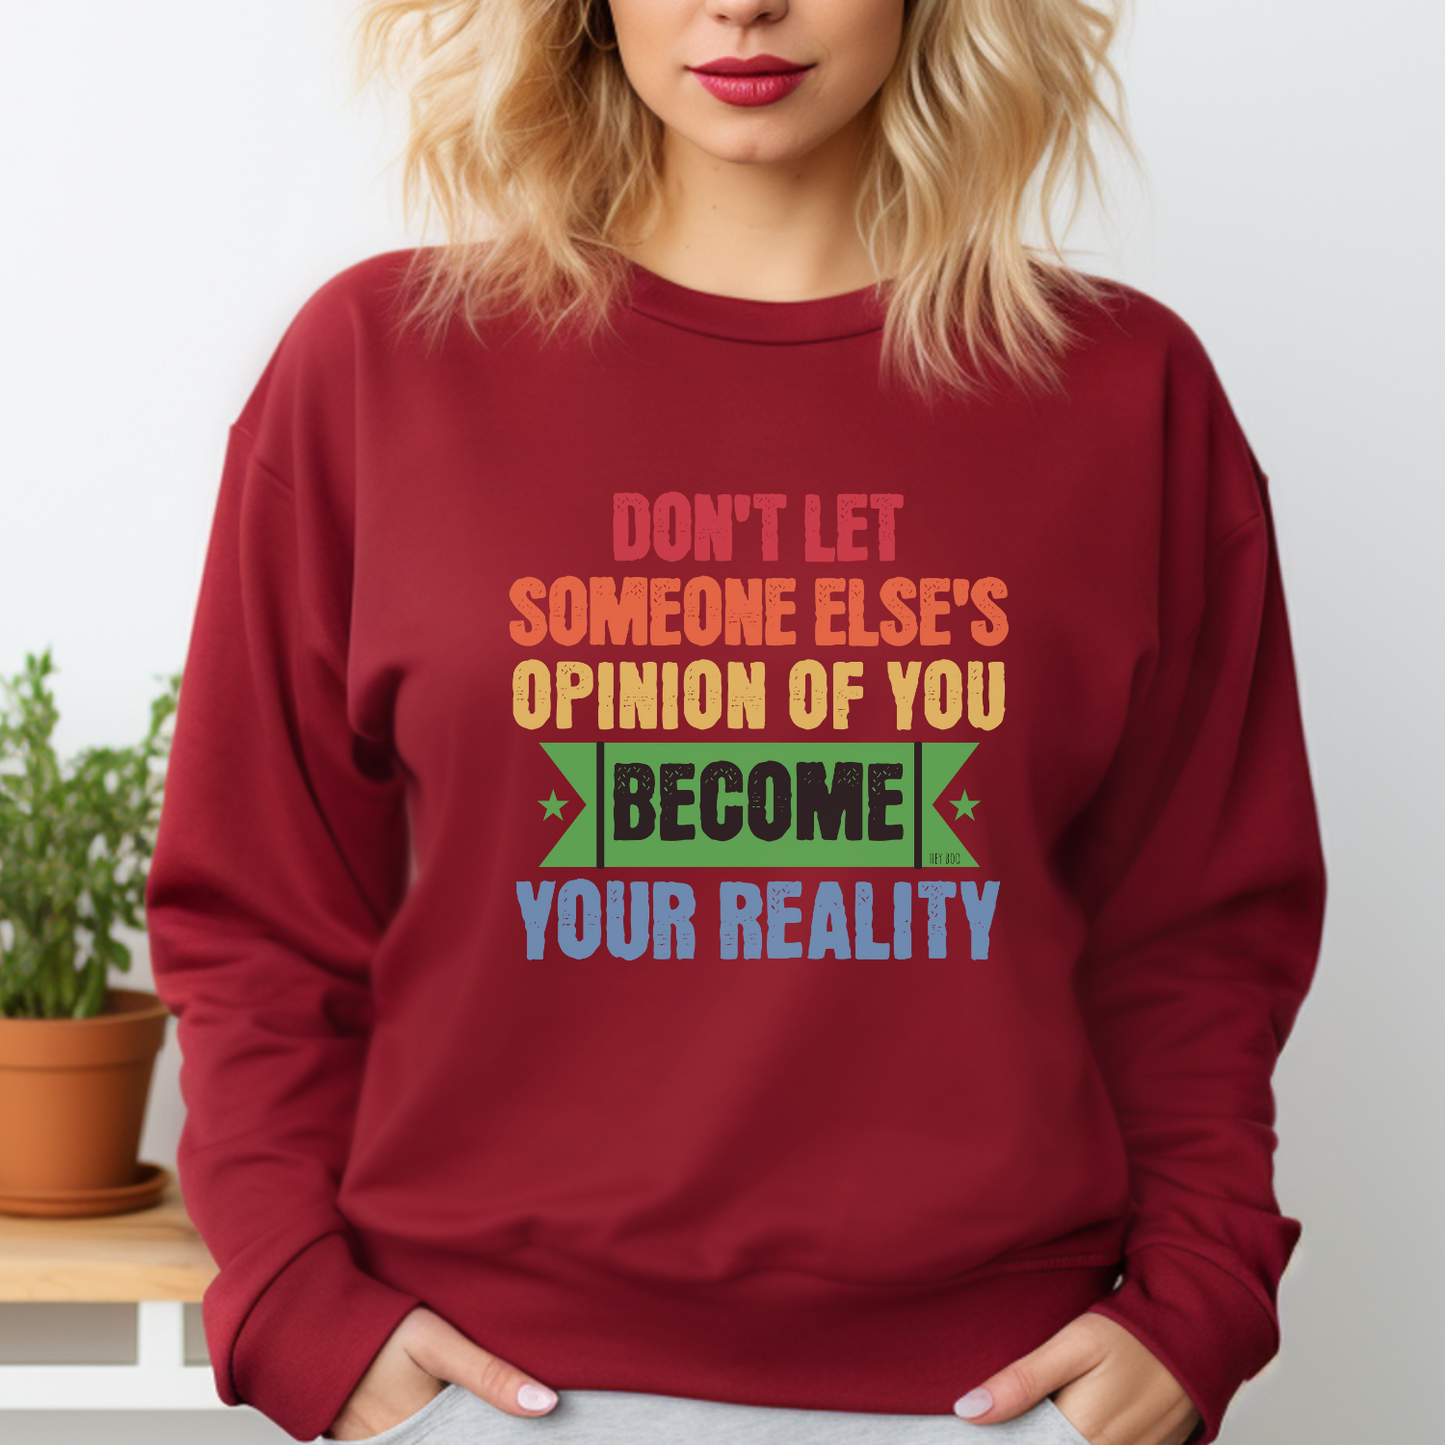 Garnet Gildan 18000 sweatshirt, with the persuasive message: Don't Let Someone Else's Opinion of You Become Your Reality. Live authentically.